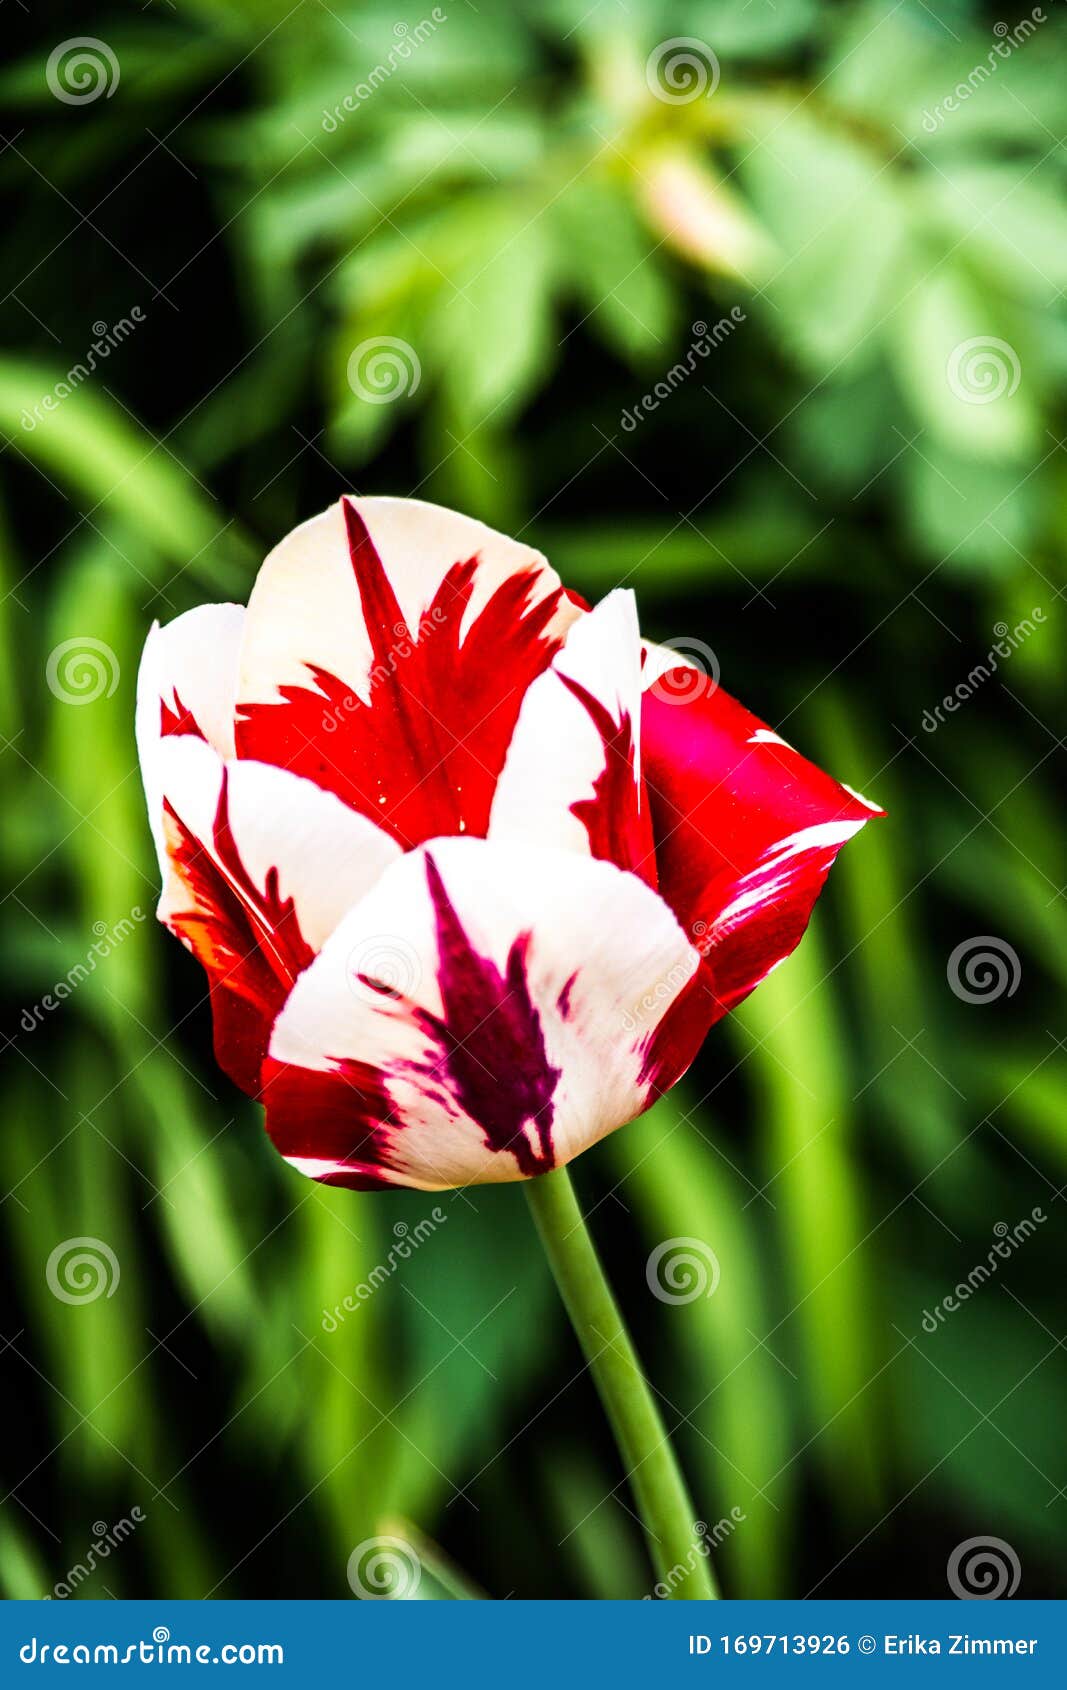 beautiful red and white tulip